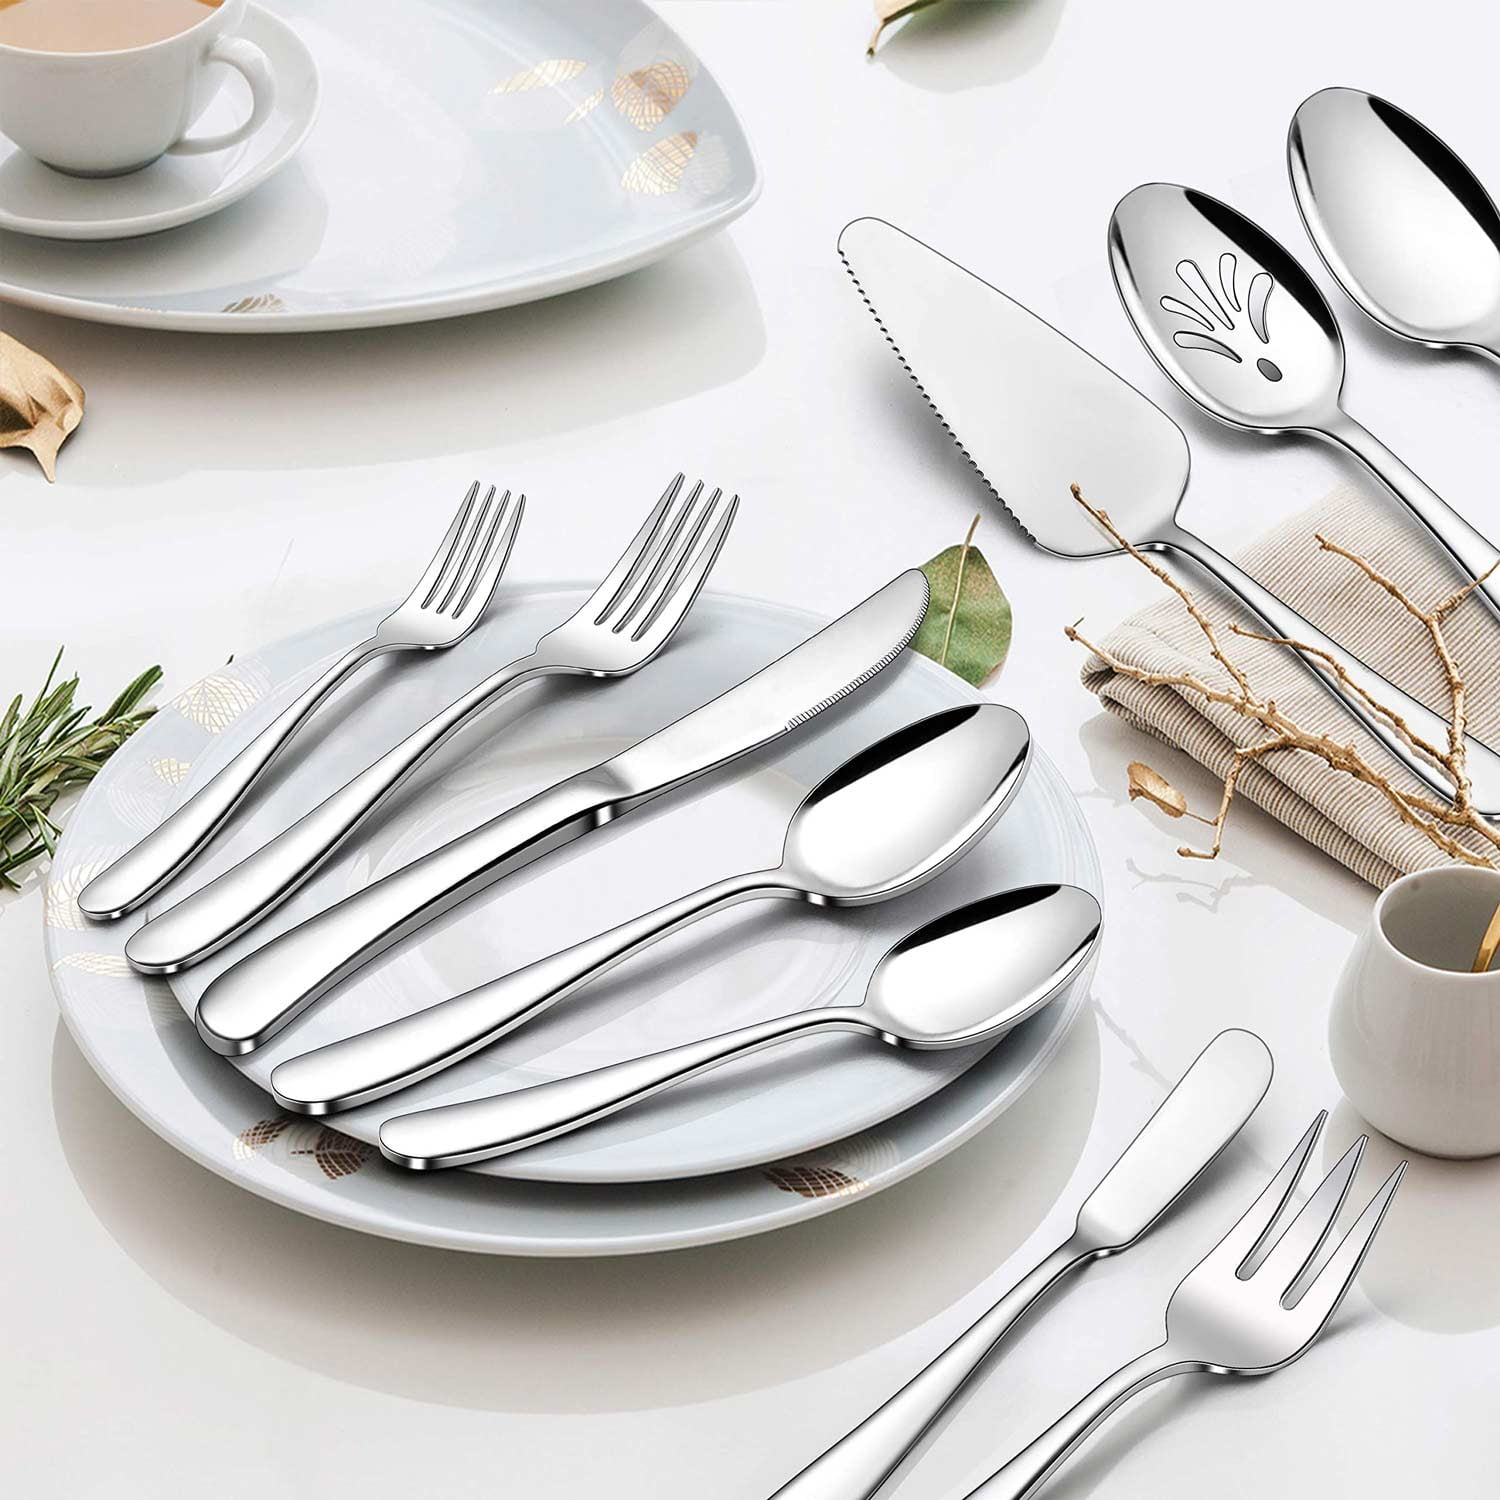 65-Piece Heavy Duty Silverware Set, E-far Stainless Steel Flatware Cutlery  Set with Serving Utensils Service for 12, Antique Metal Tableware Eating